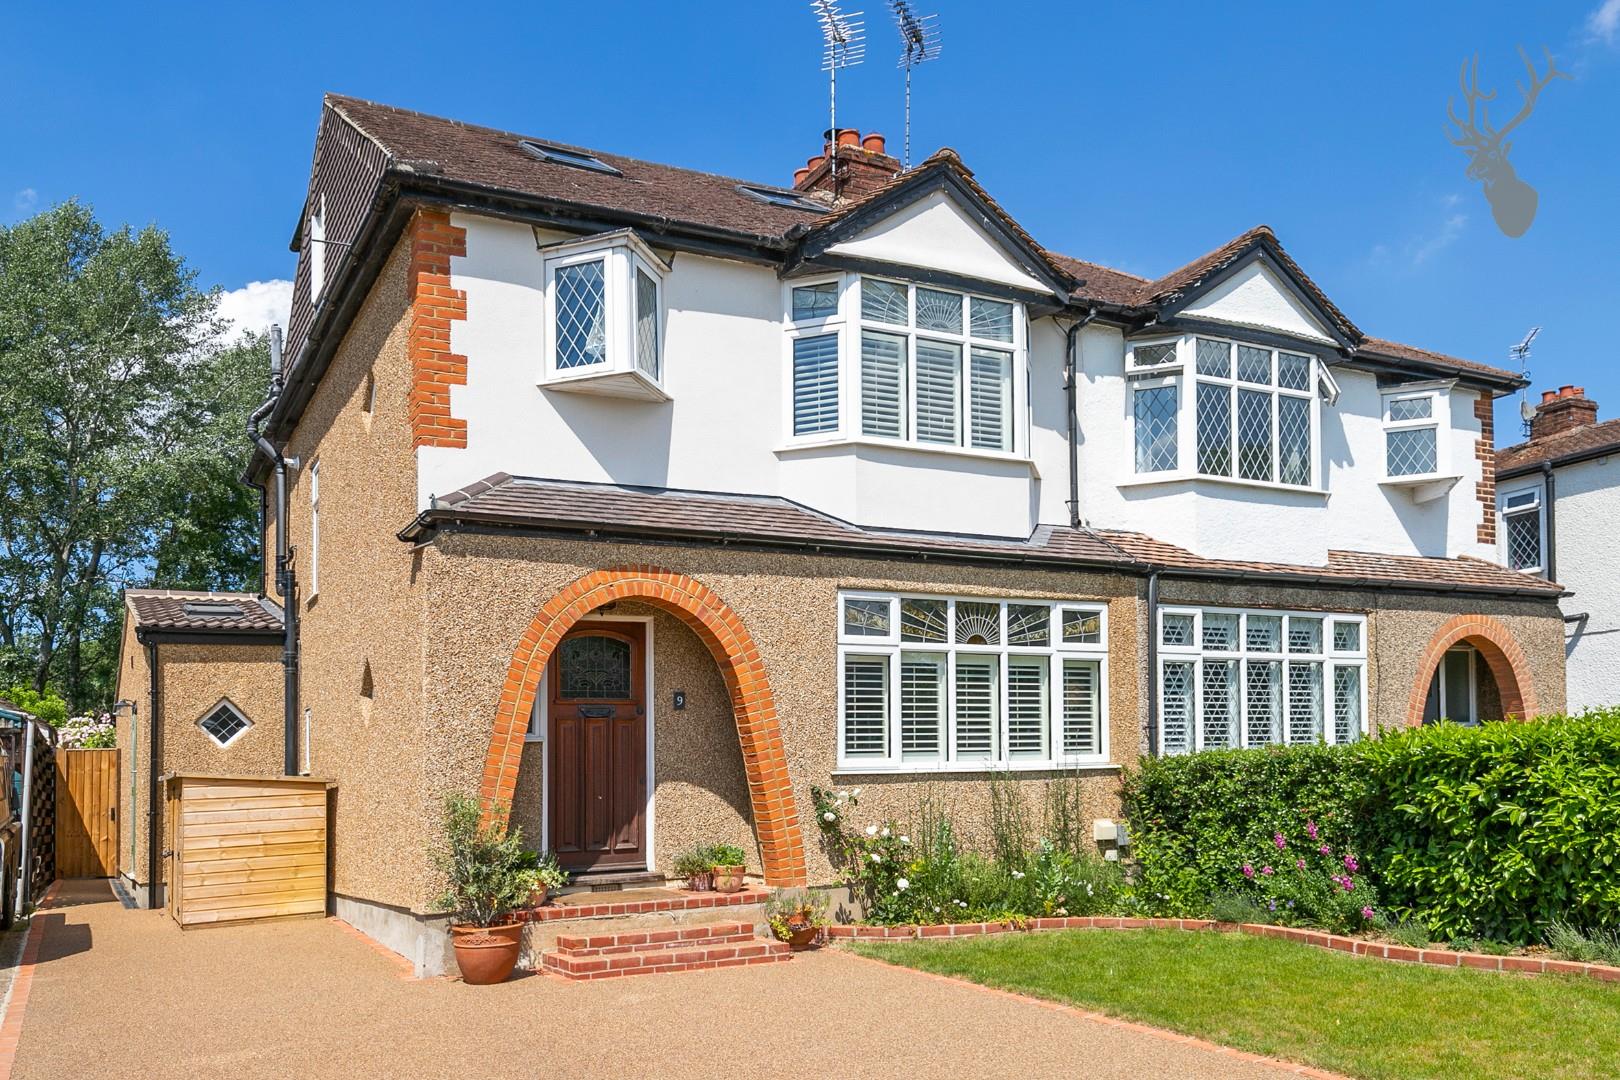 Similar Property: House - Semi-Detached in Theydon Bois